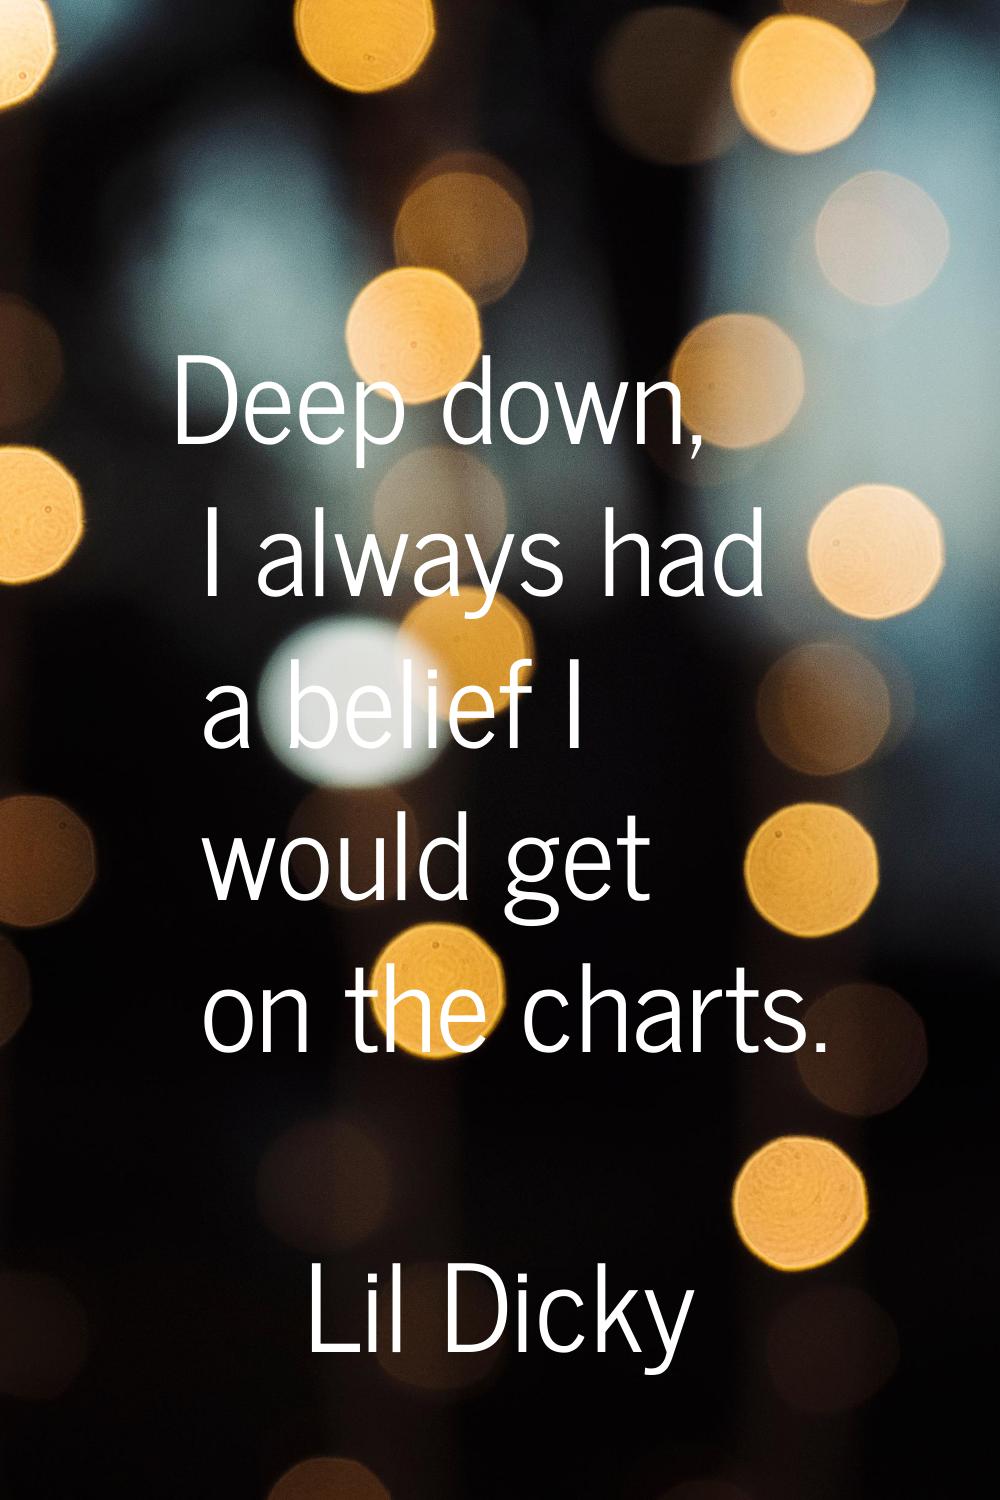 Deep down, I always had a belief I would get on the charts.